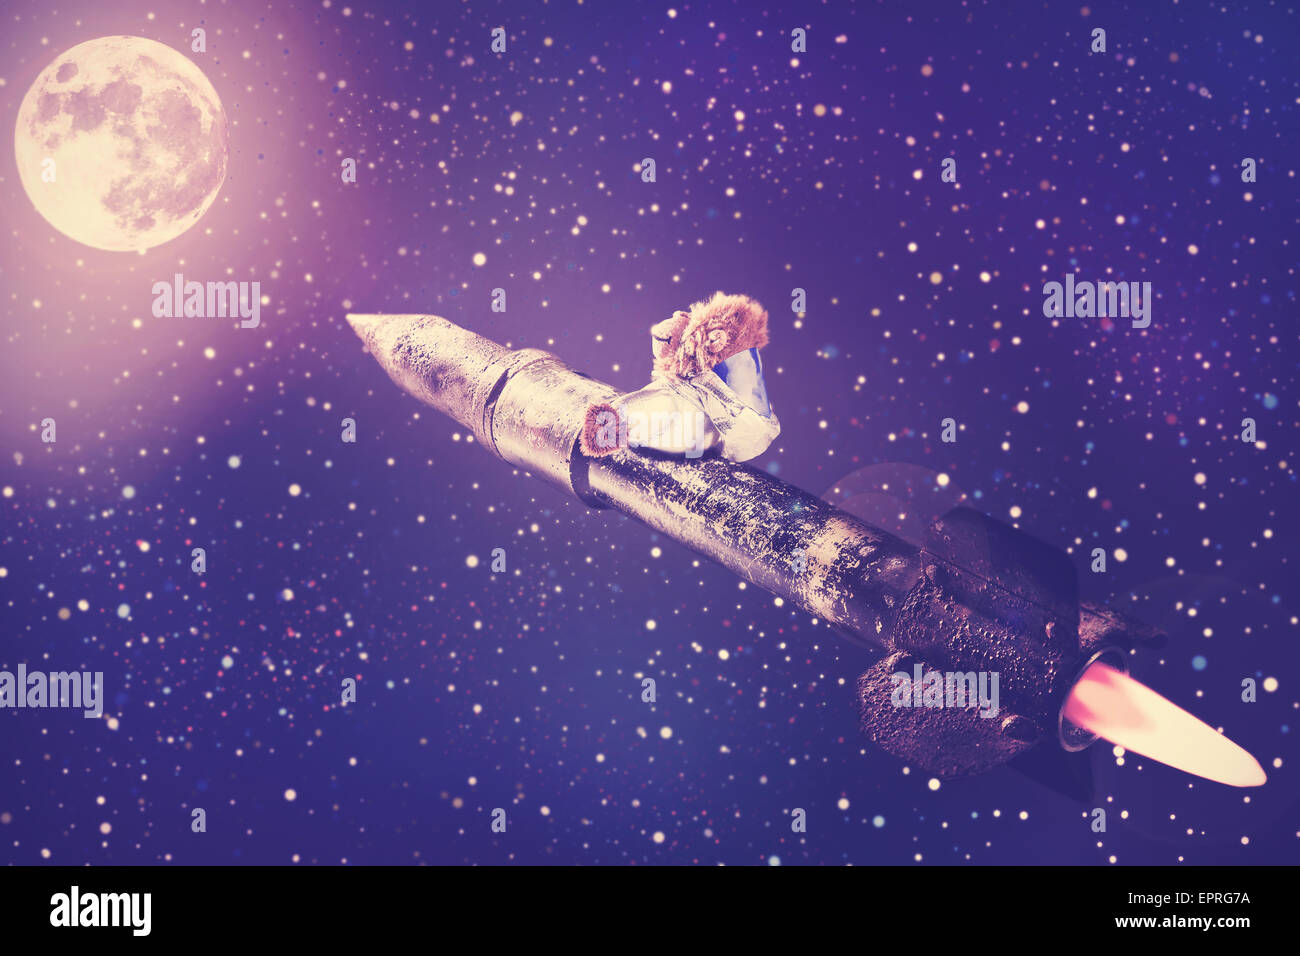 Monkey mascot in rocket flying to the moon. Stock Photo